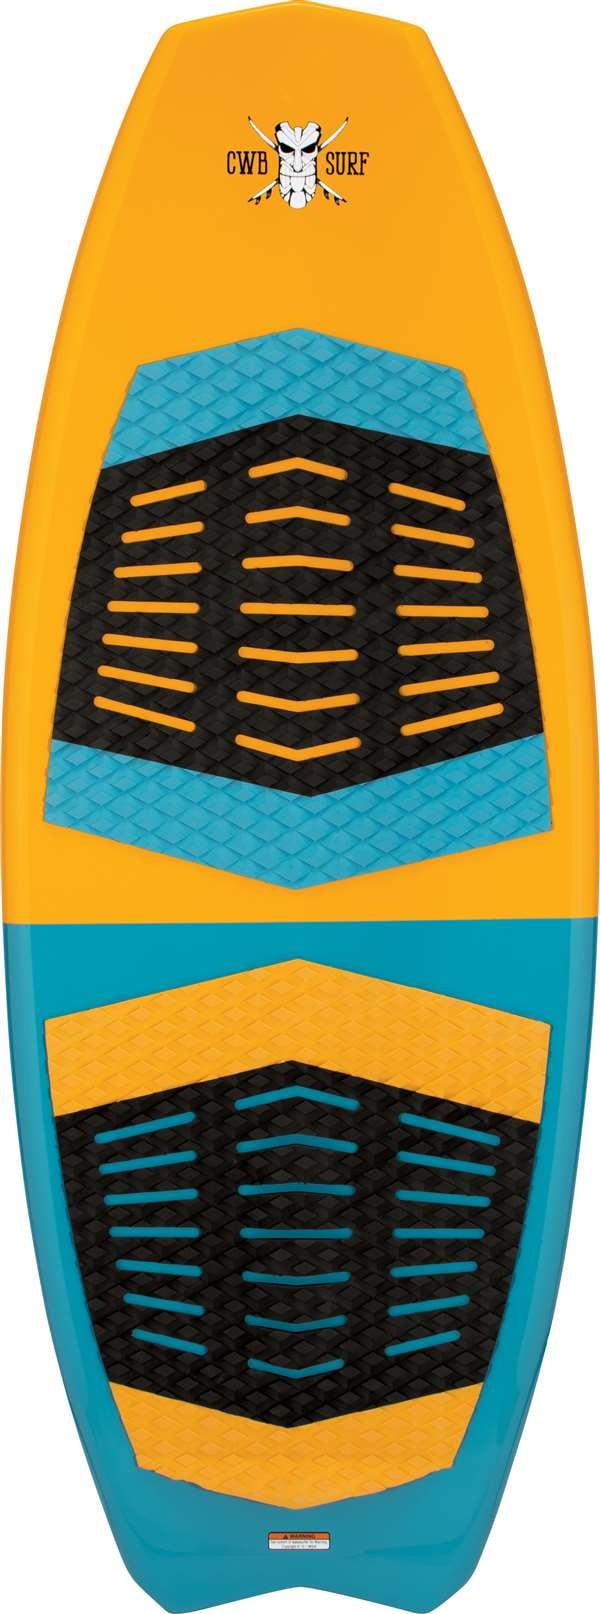 Replacement Futures Fins F4 Quad Setup for Rukus and Throwdown Wakesurf Boards 